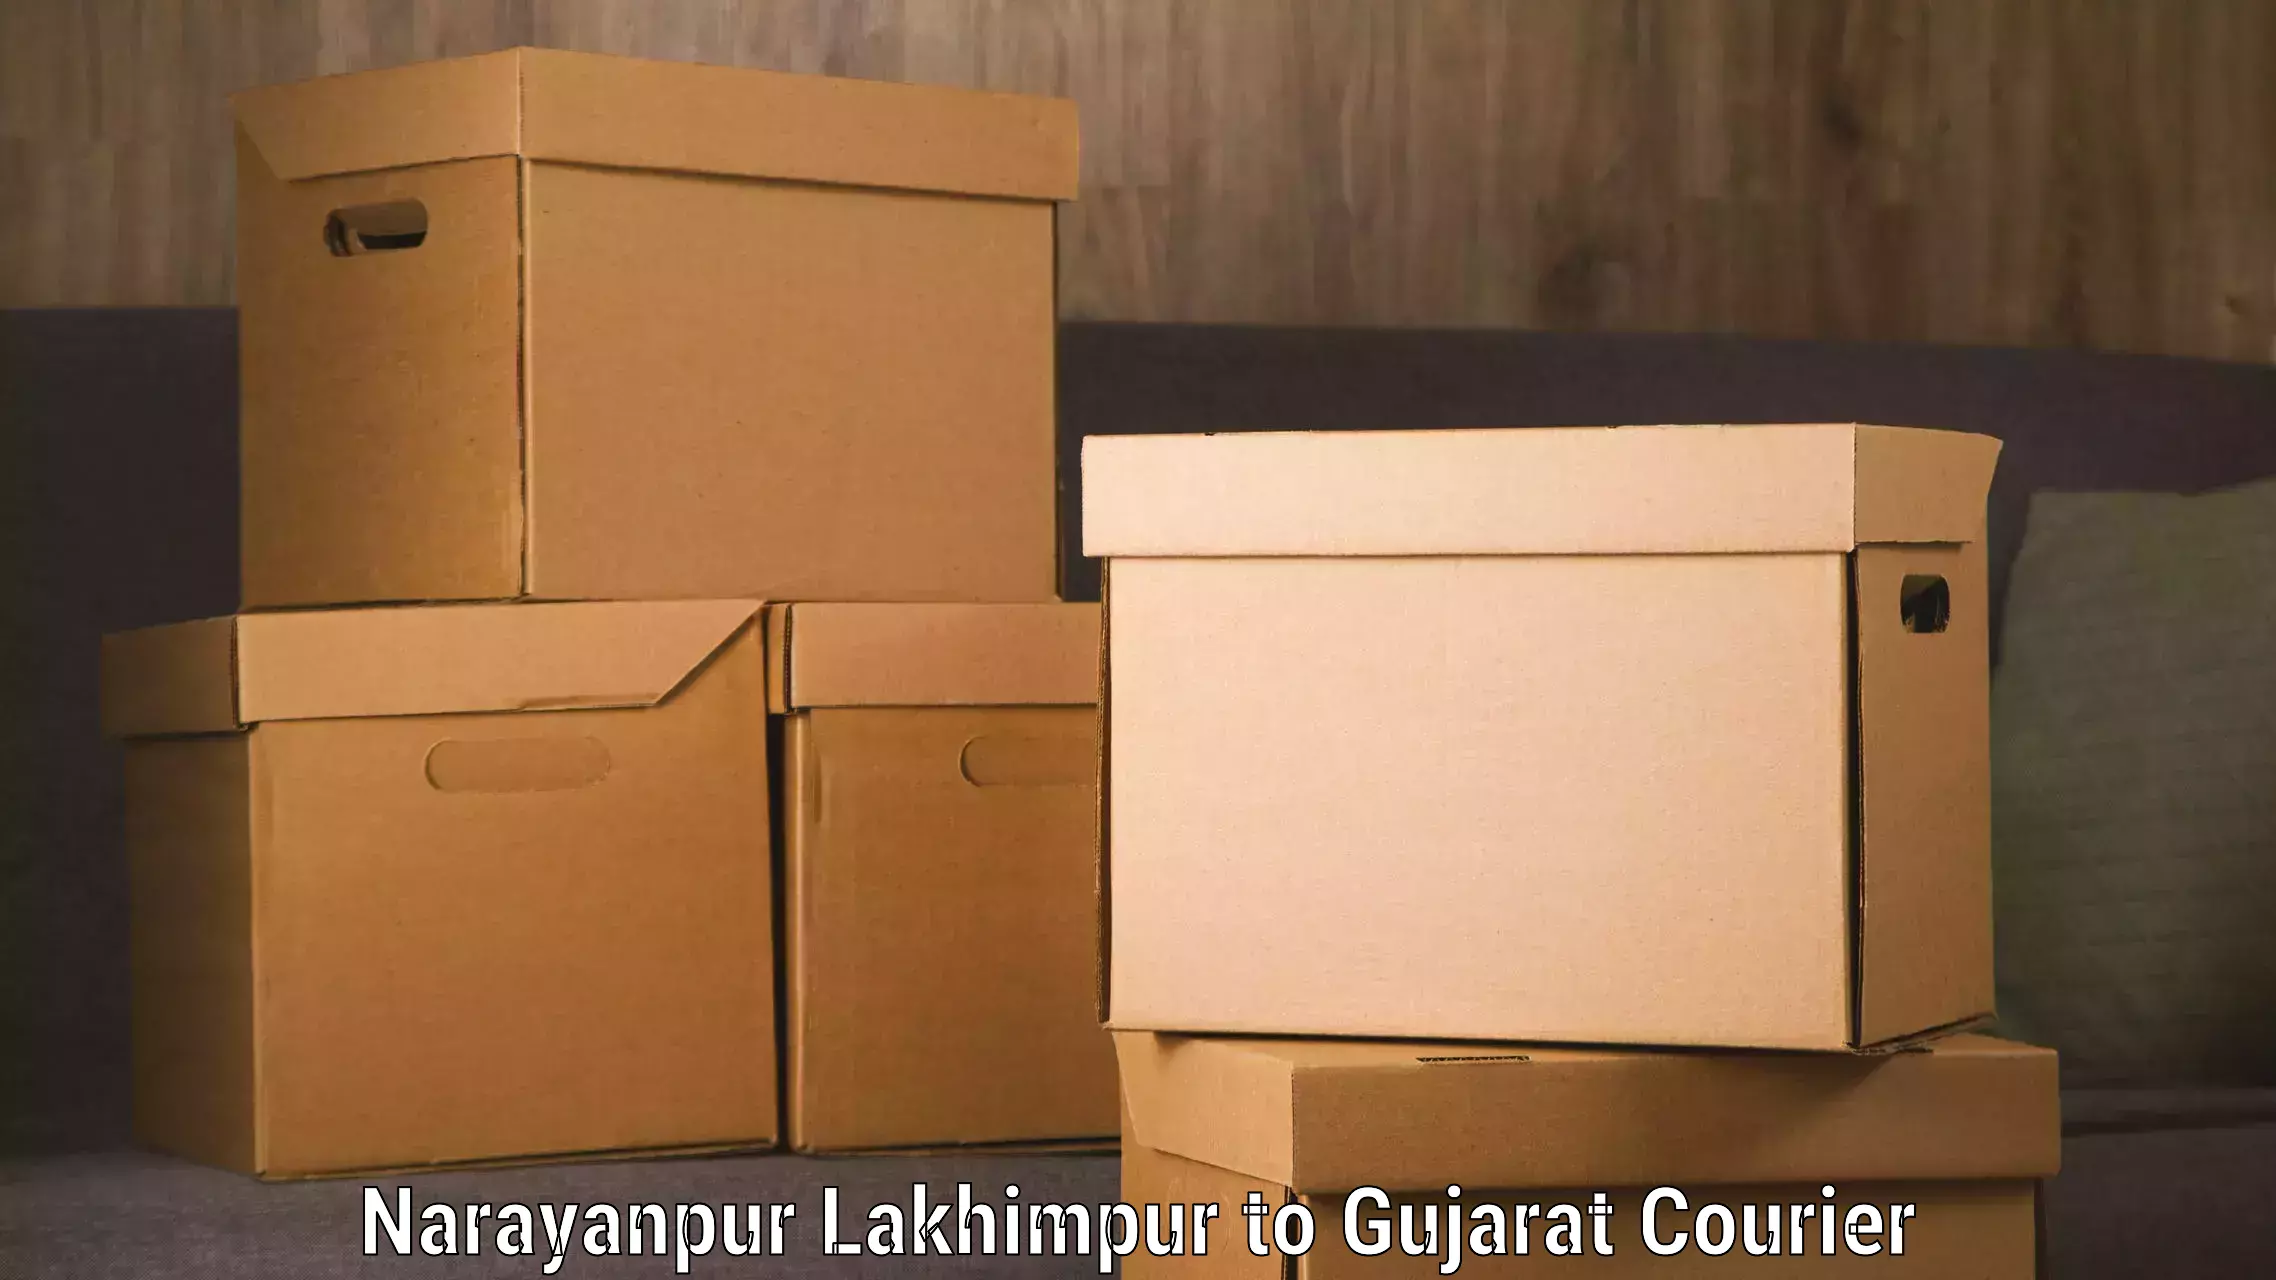 Automated luggage transport in Narayanpur Lakhimpur to Una Gir Somnath